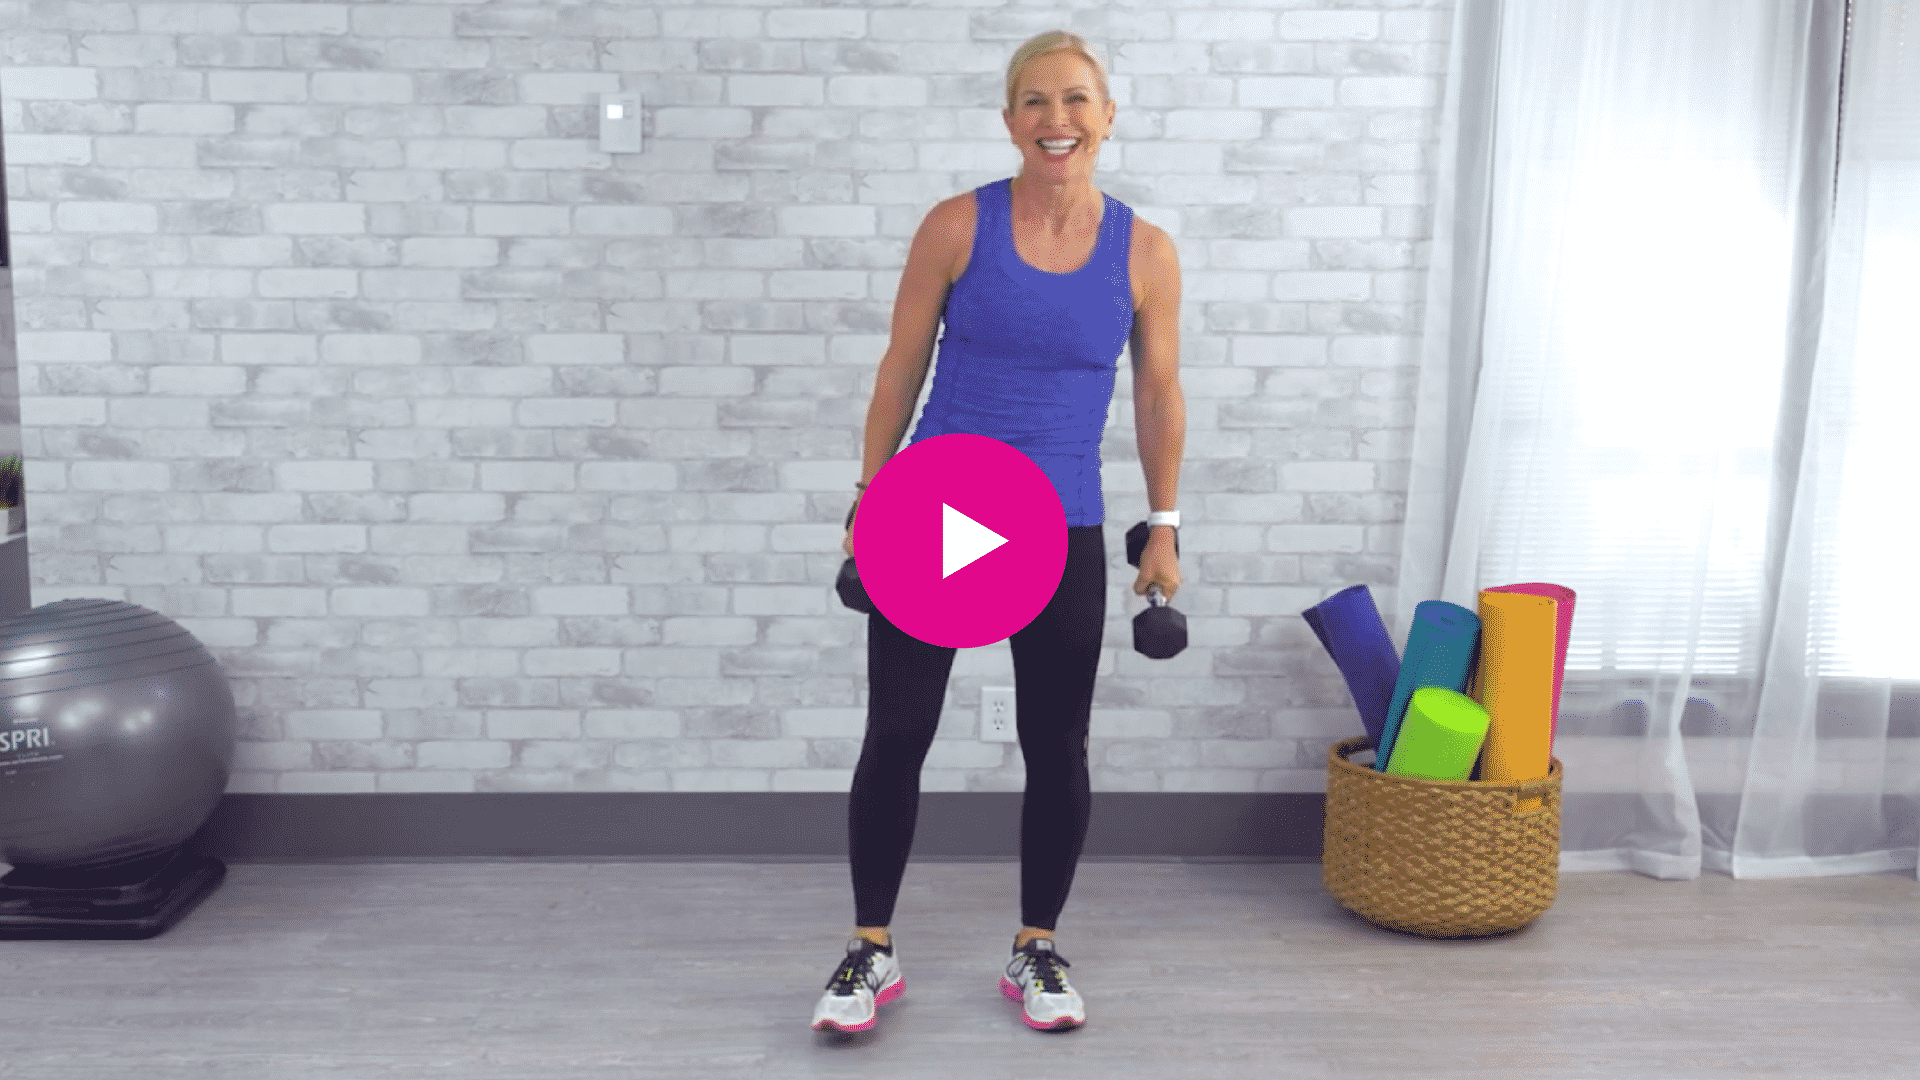 Chris Freytag performing a 10 minute tabata interval workout